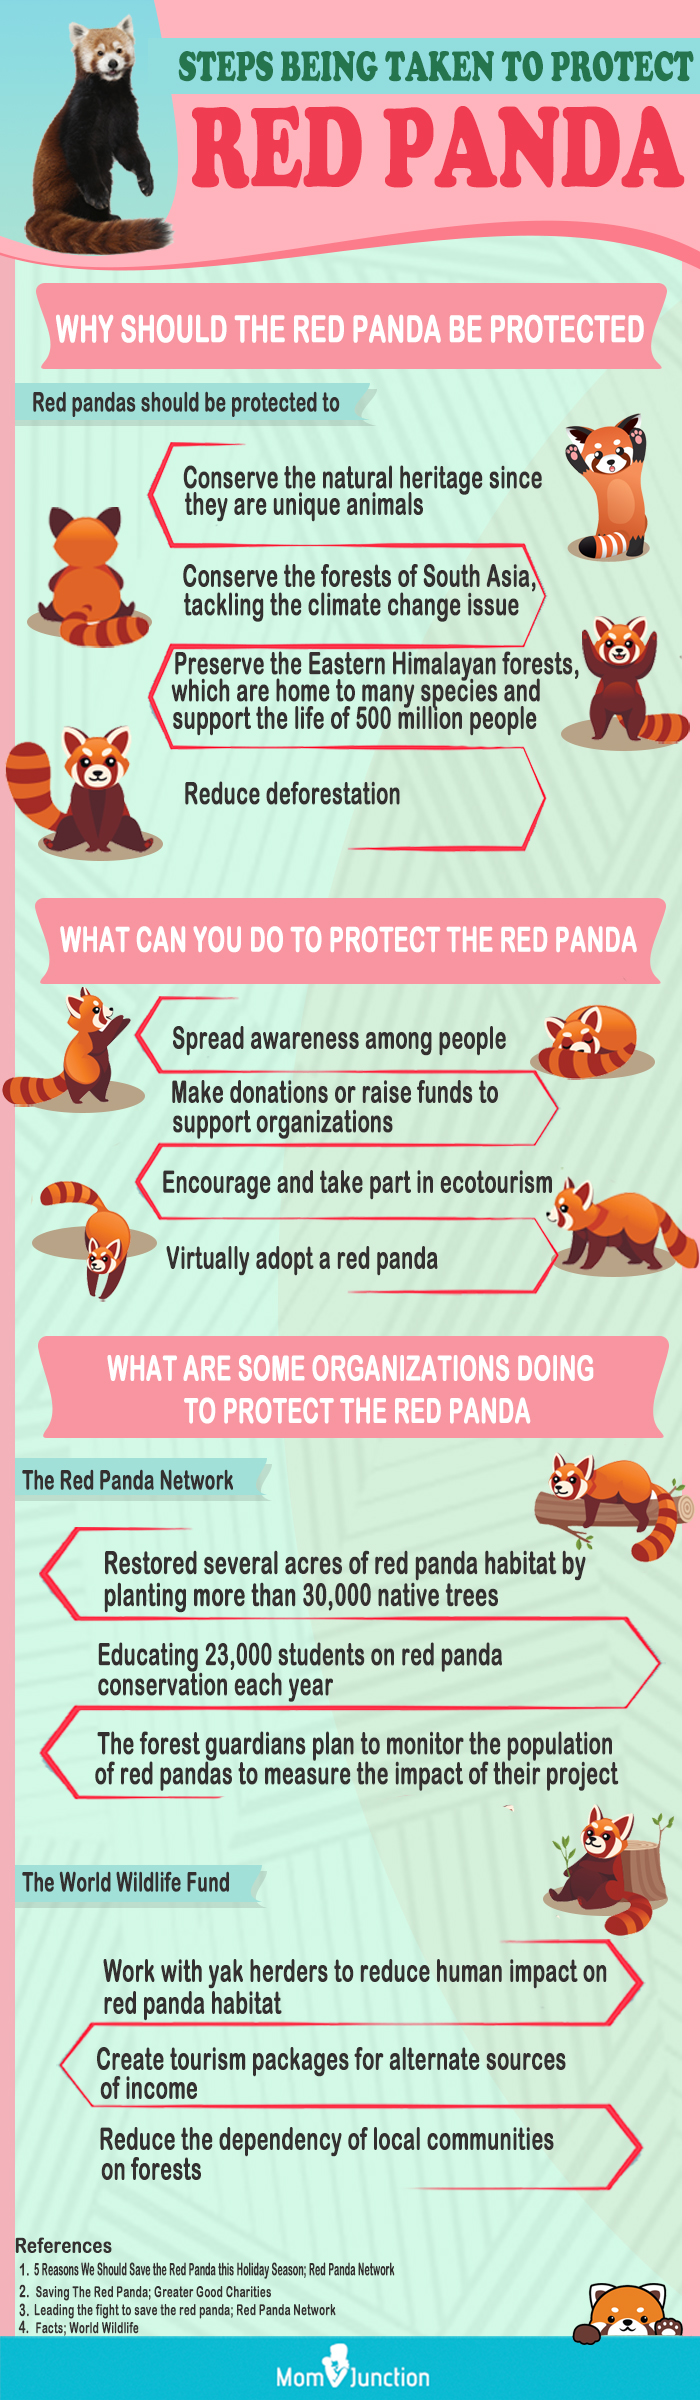 steps being tekan to protect red panda (infographic)